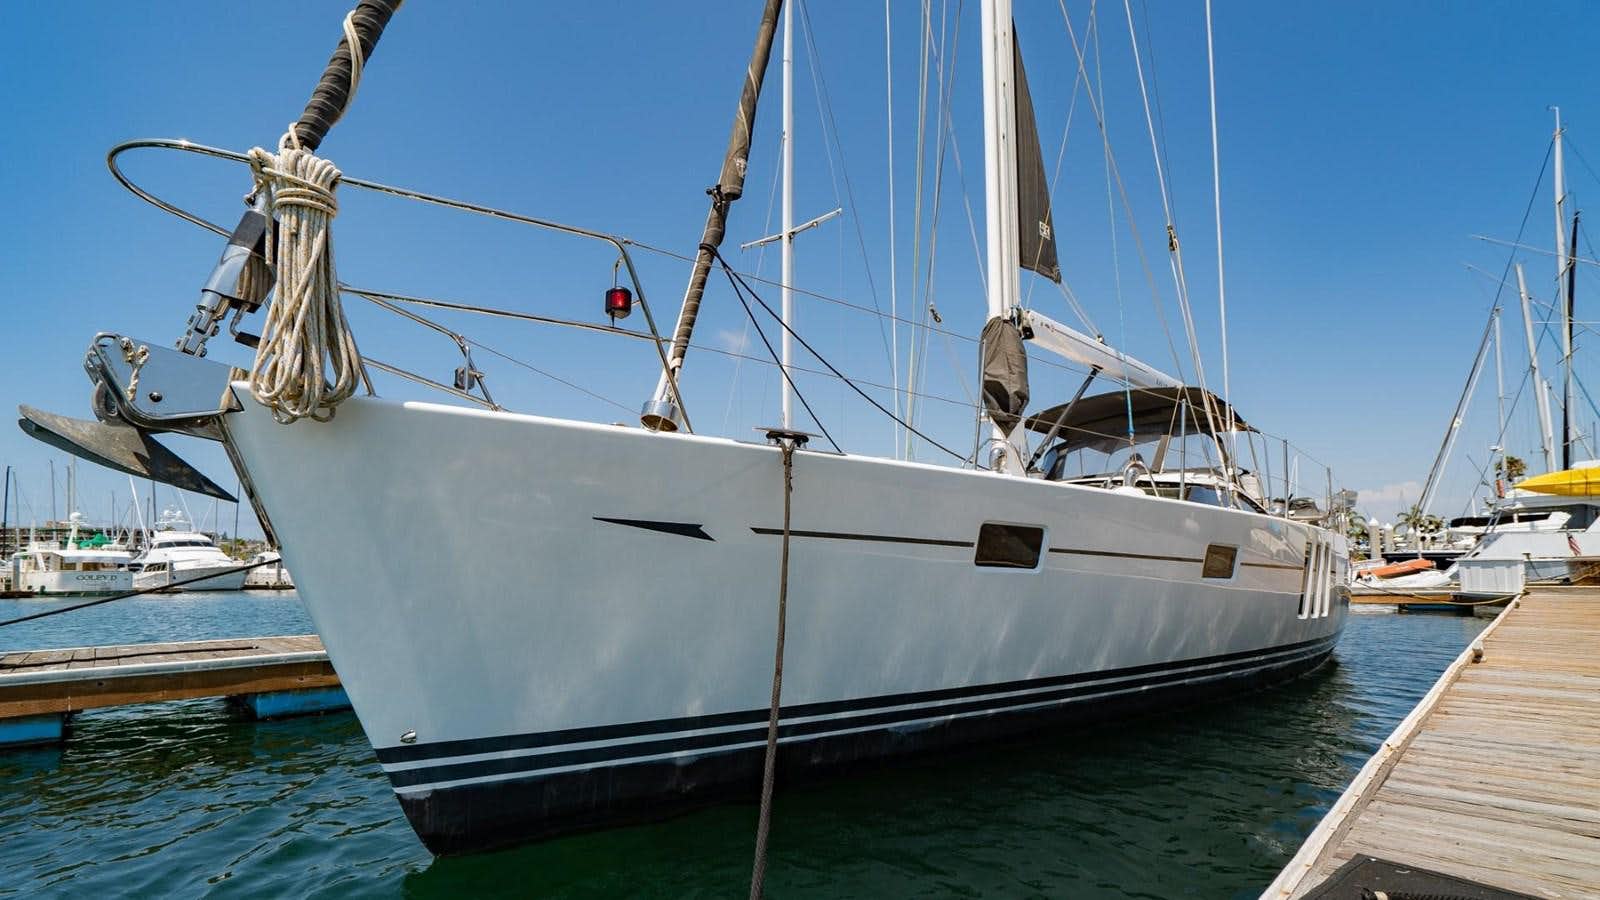 Kelly
Yacht for Sale